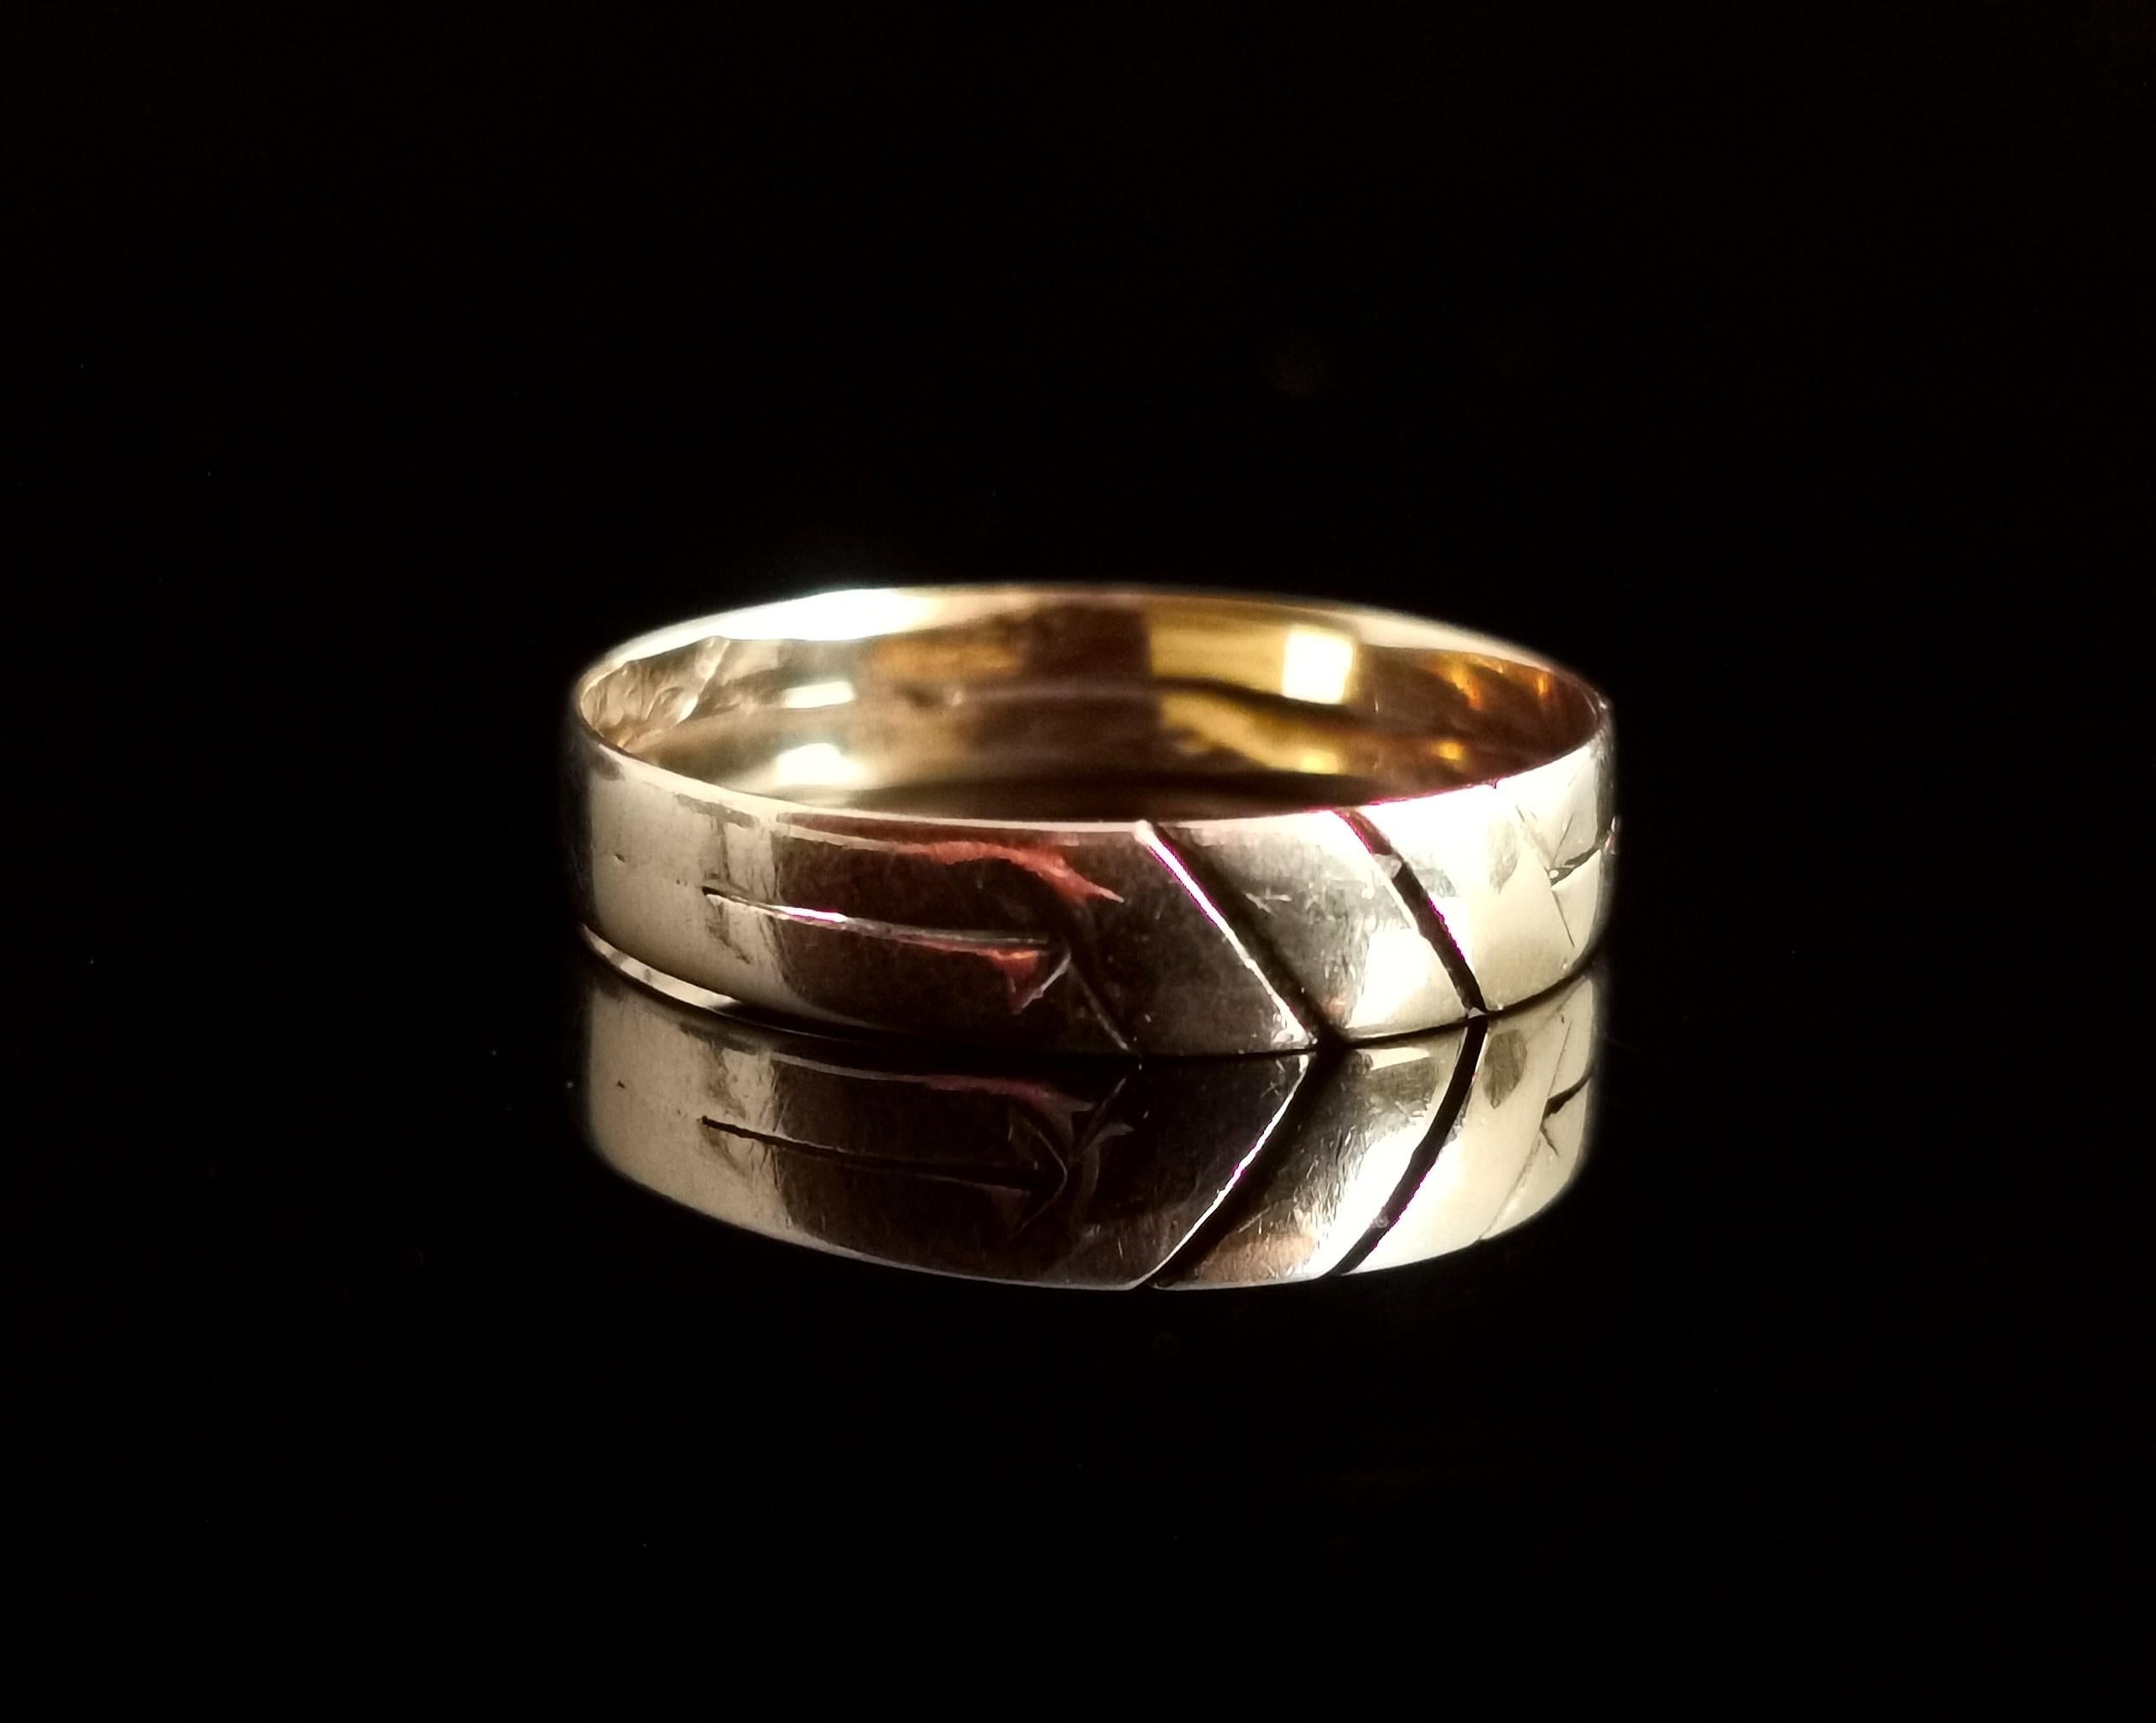 An attractive and interesting Victorian 18 karat gold band ring.

The face has an attractive geometric engraved design with three parallel lines running down diagonally.

It has a split band in the rich antique 18 karat yellow gold, one if the most